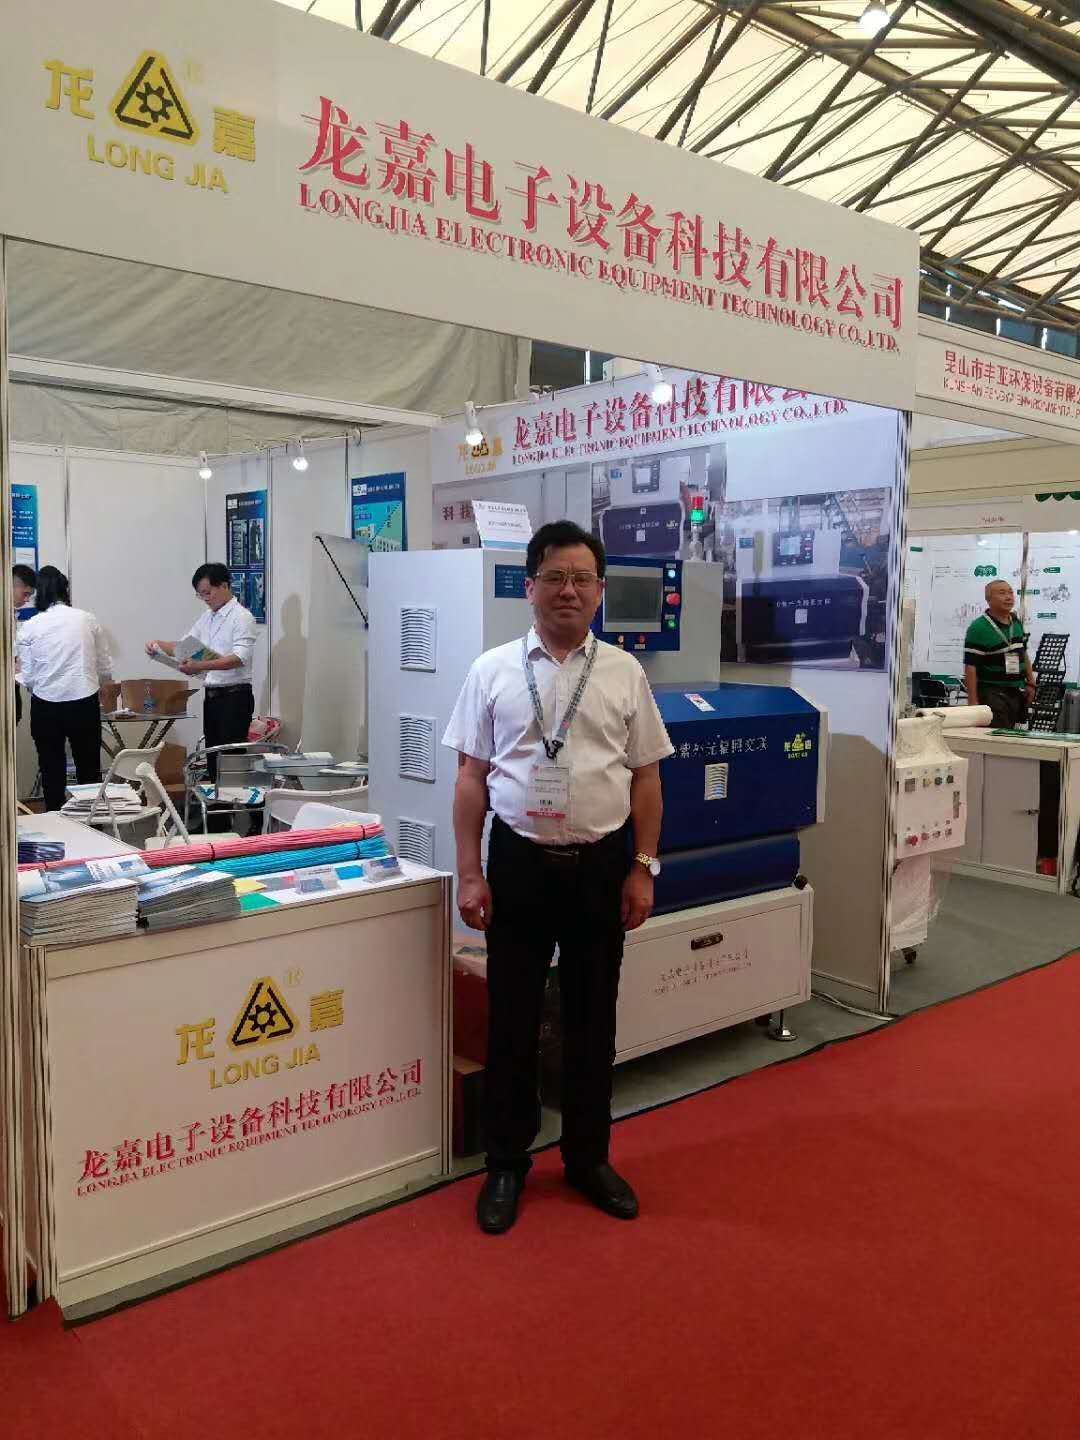 General manager wang zhenwei and the staff to attend the 2018 China international exhibition on cable and wire technology!